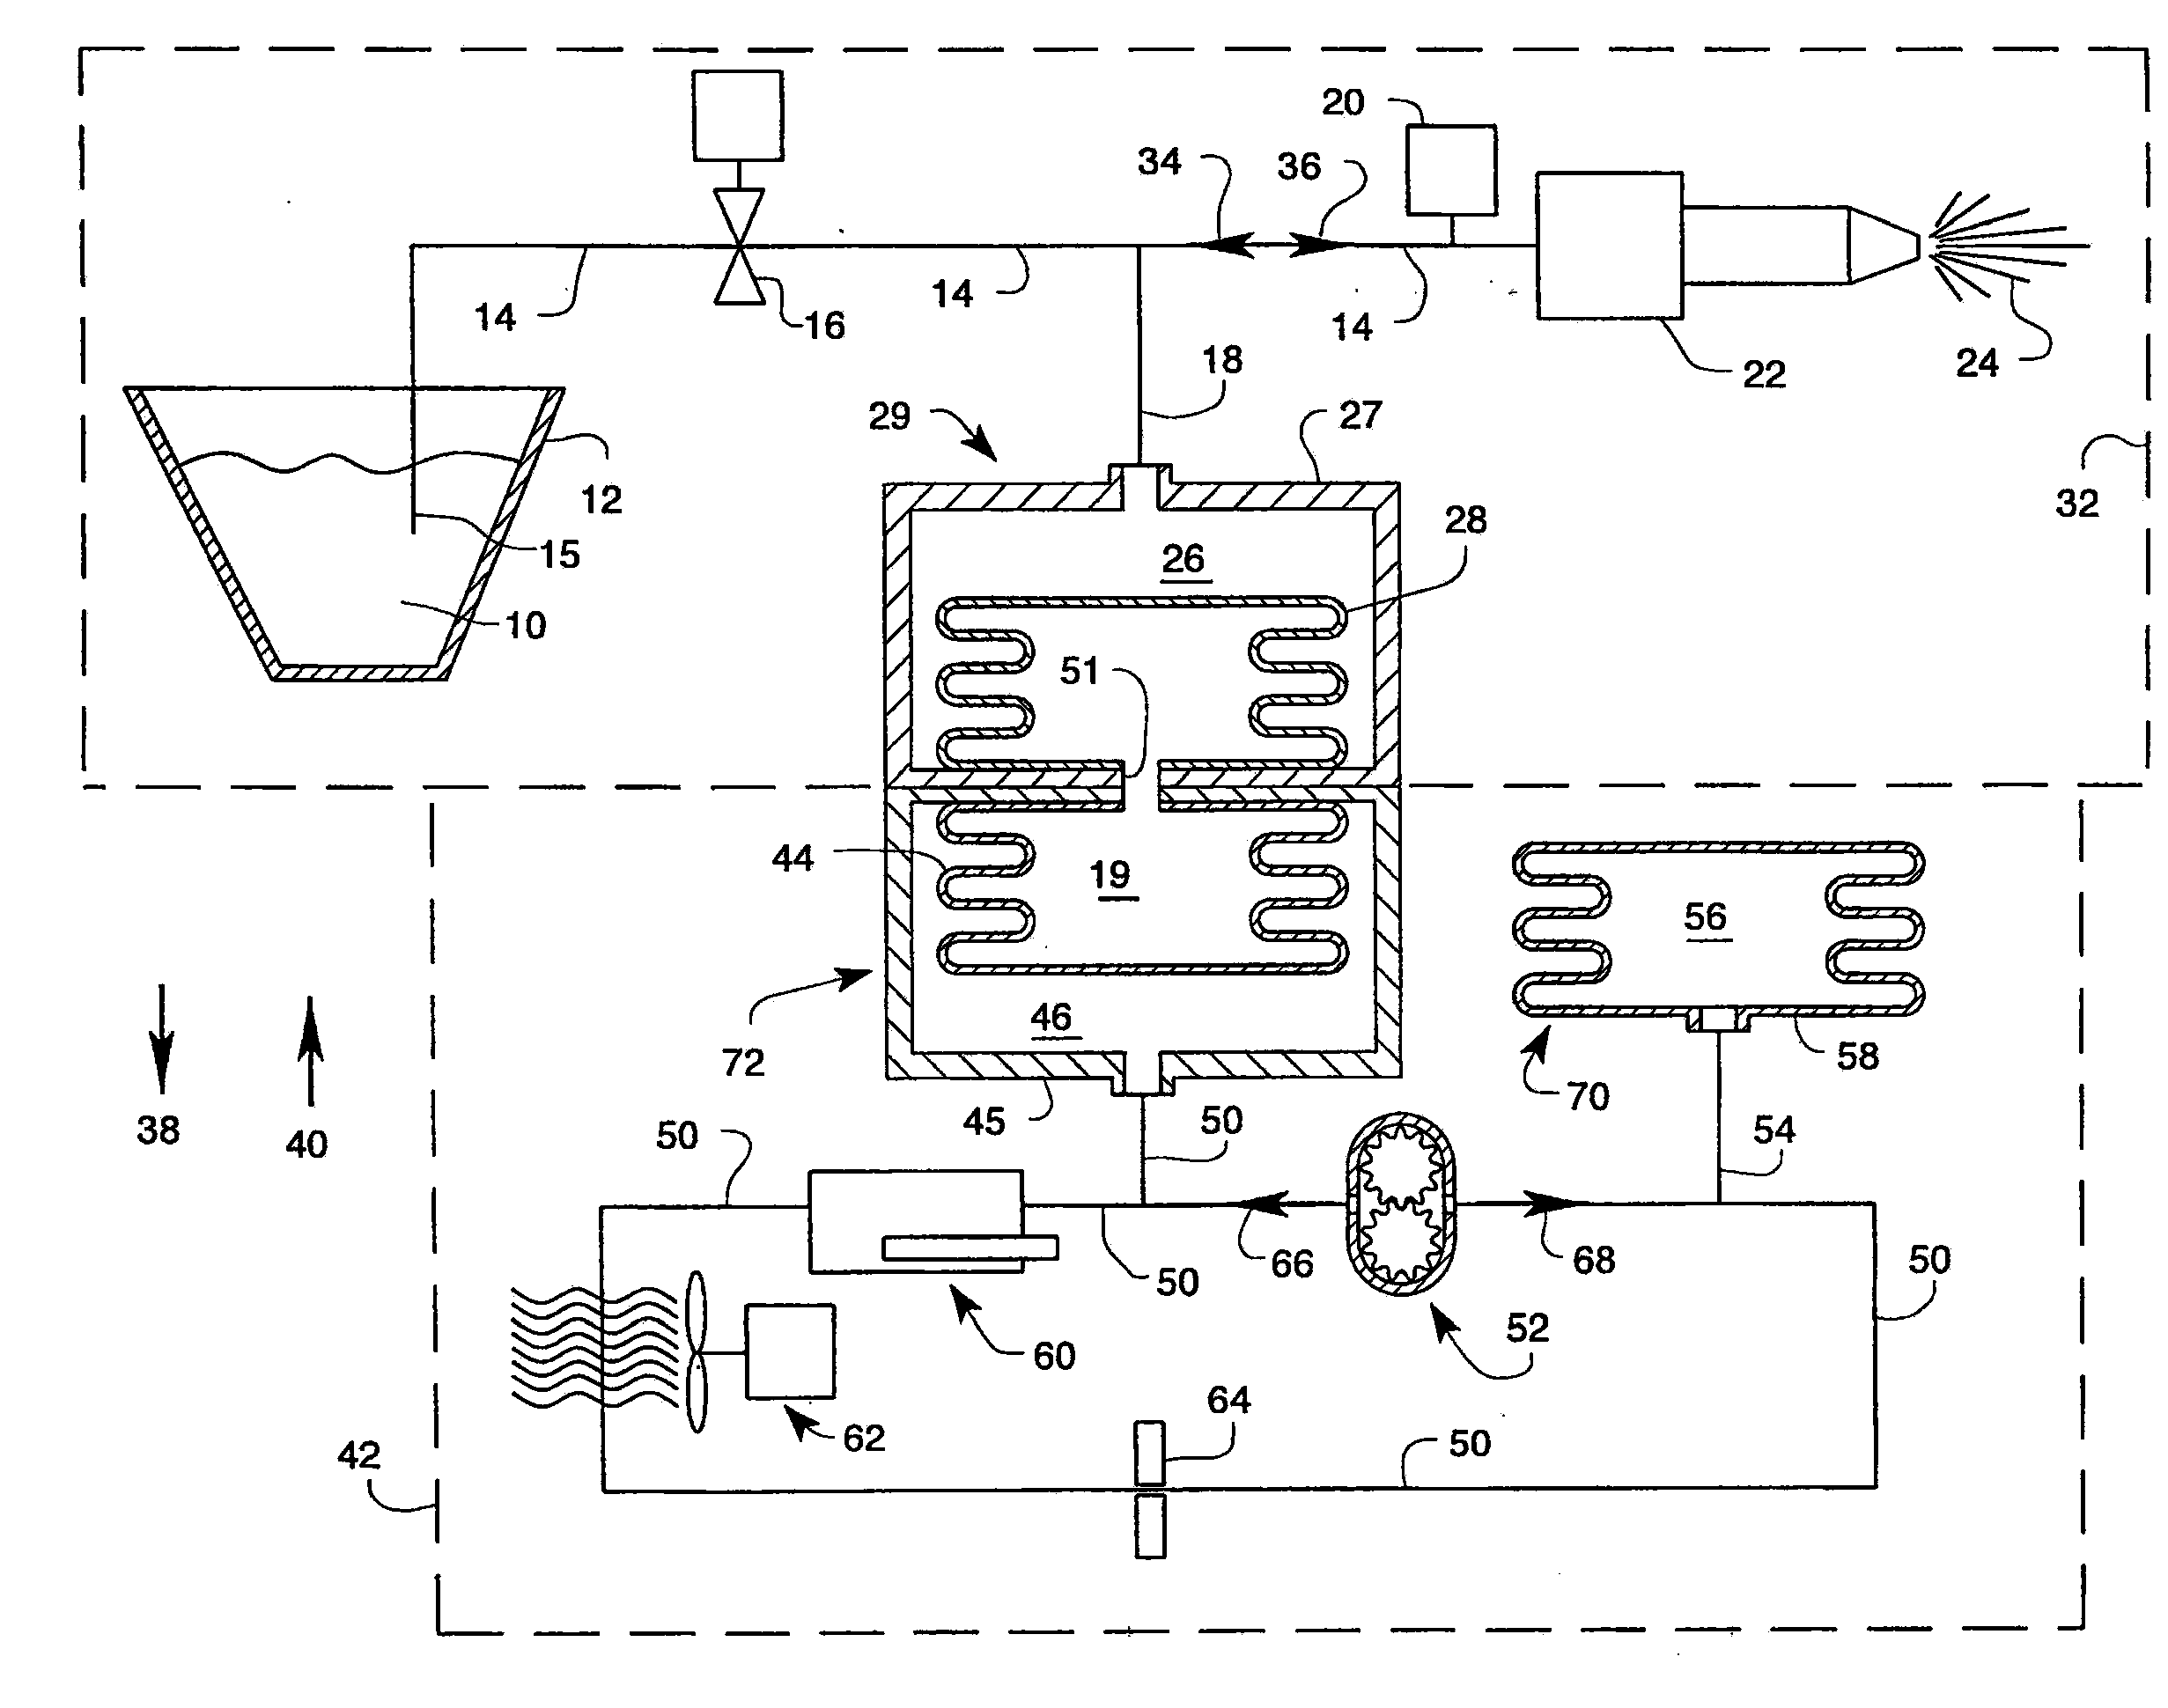 Fluid dispensing system with thermal control